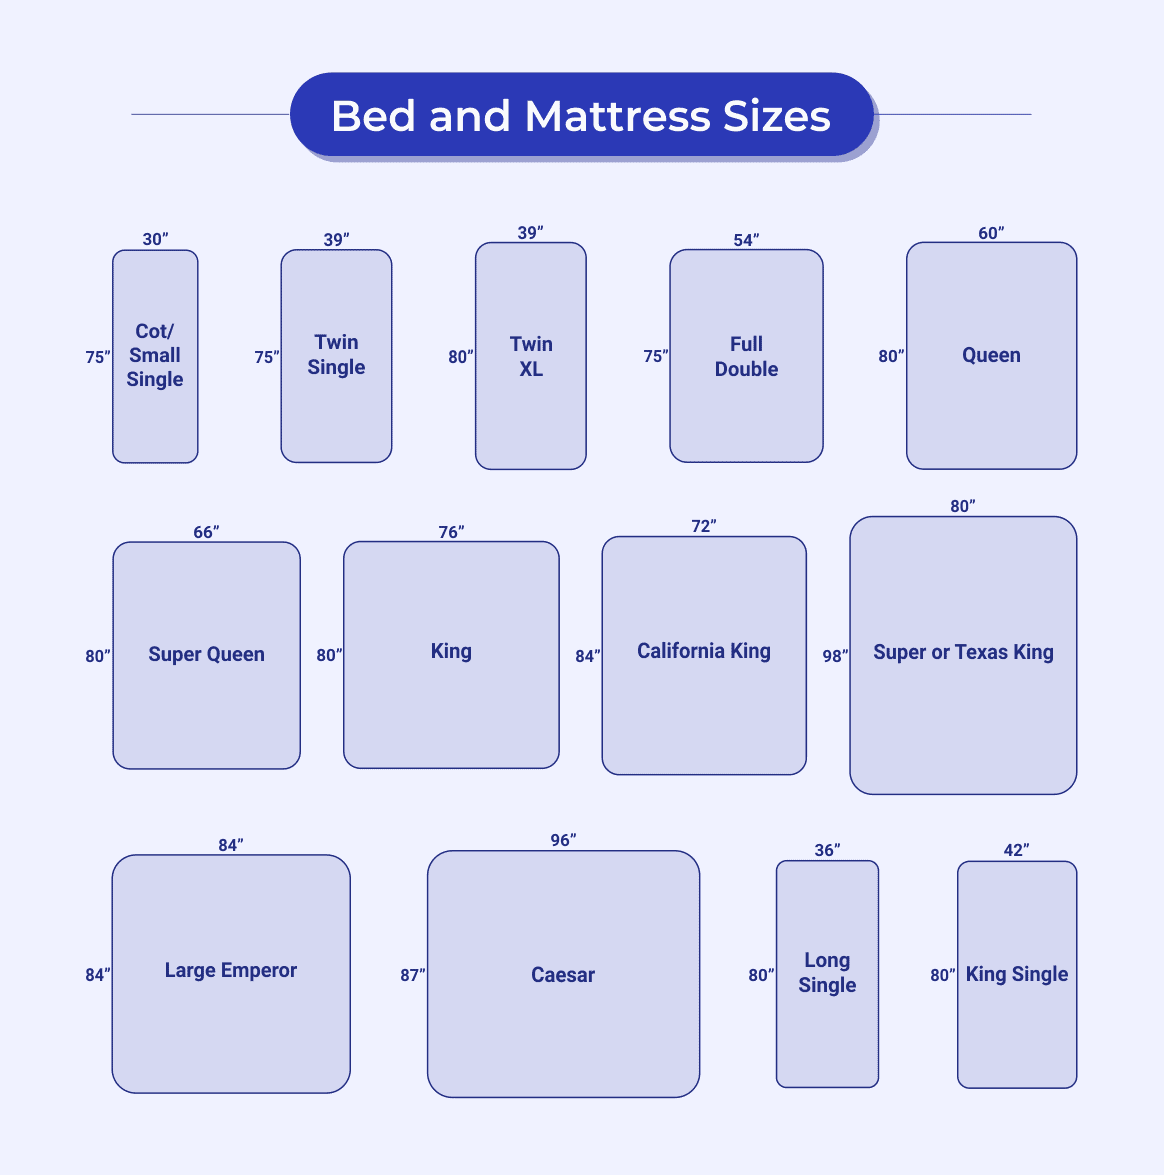 Mattress And Bed Sizes What Are The, How Big Is A California King Bed In Inches